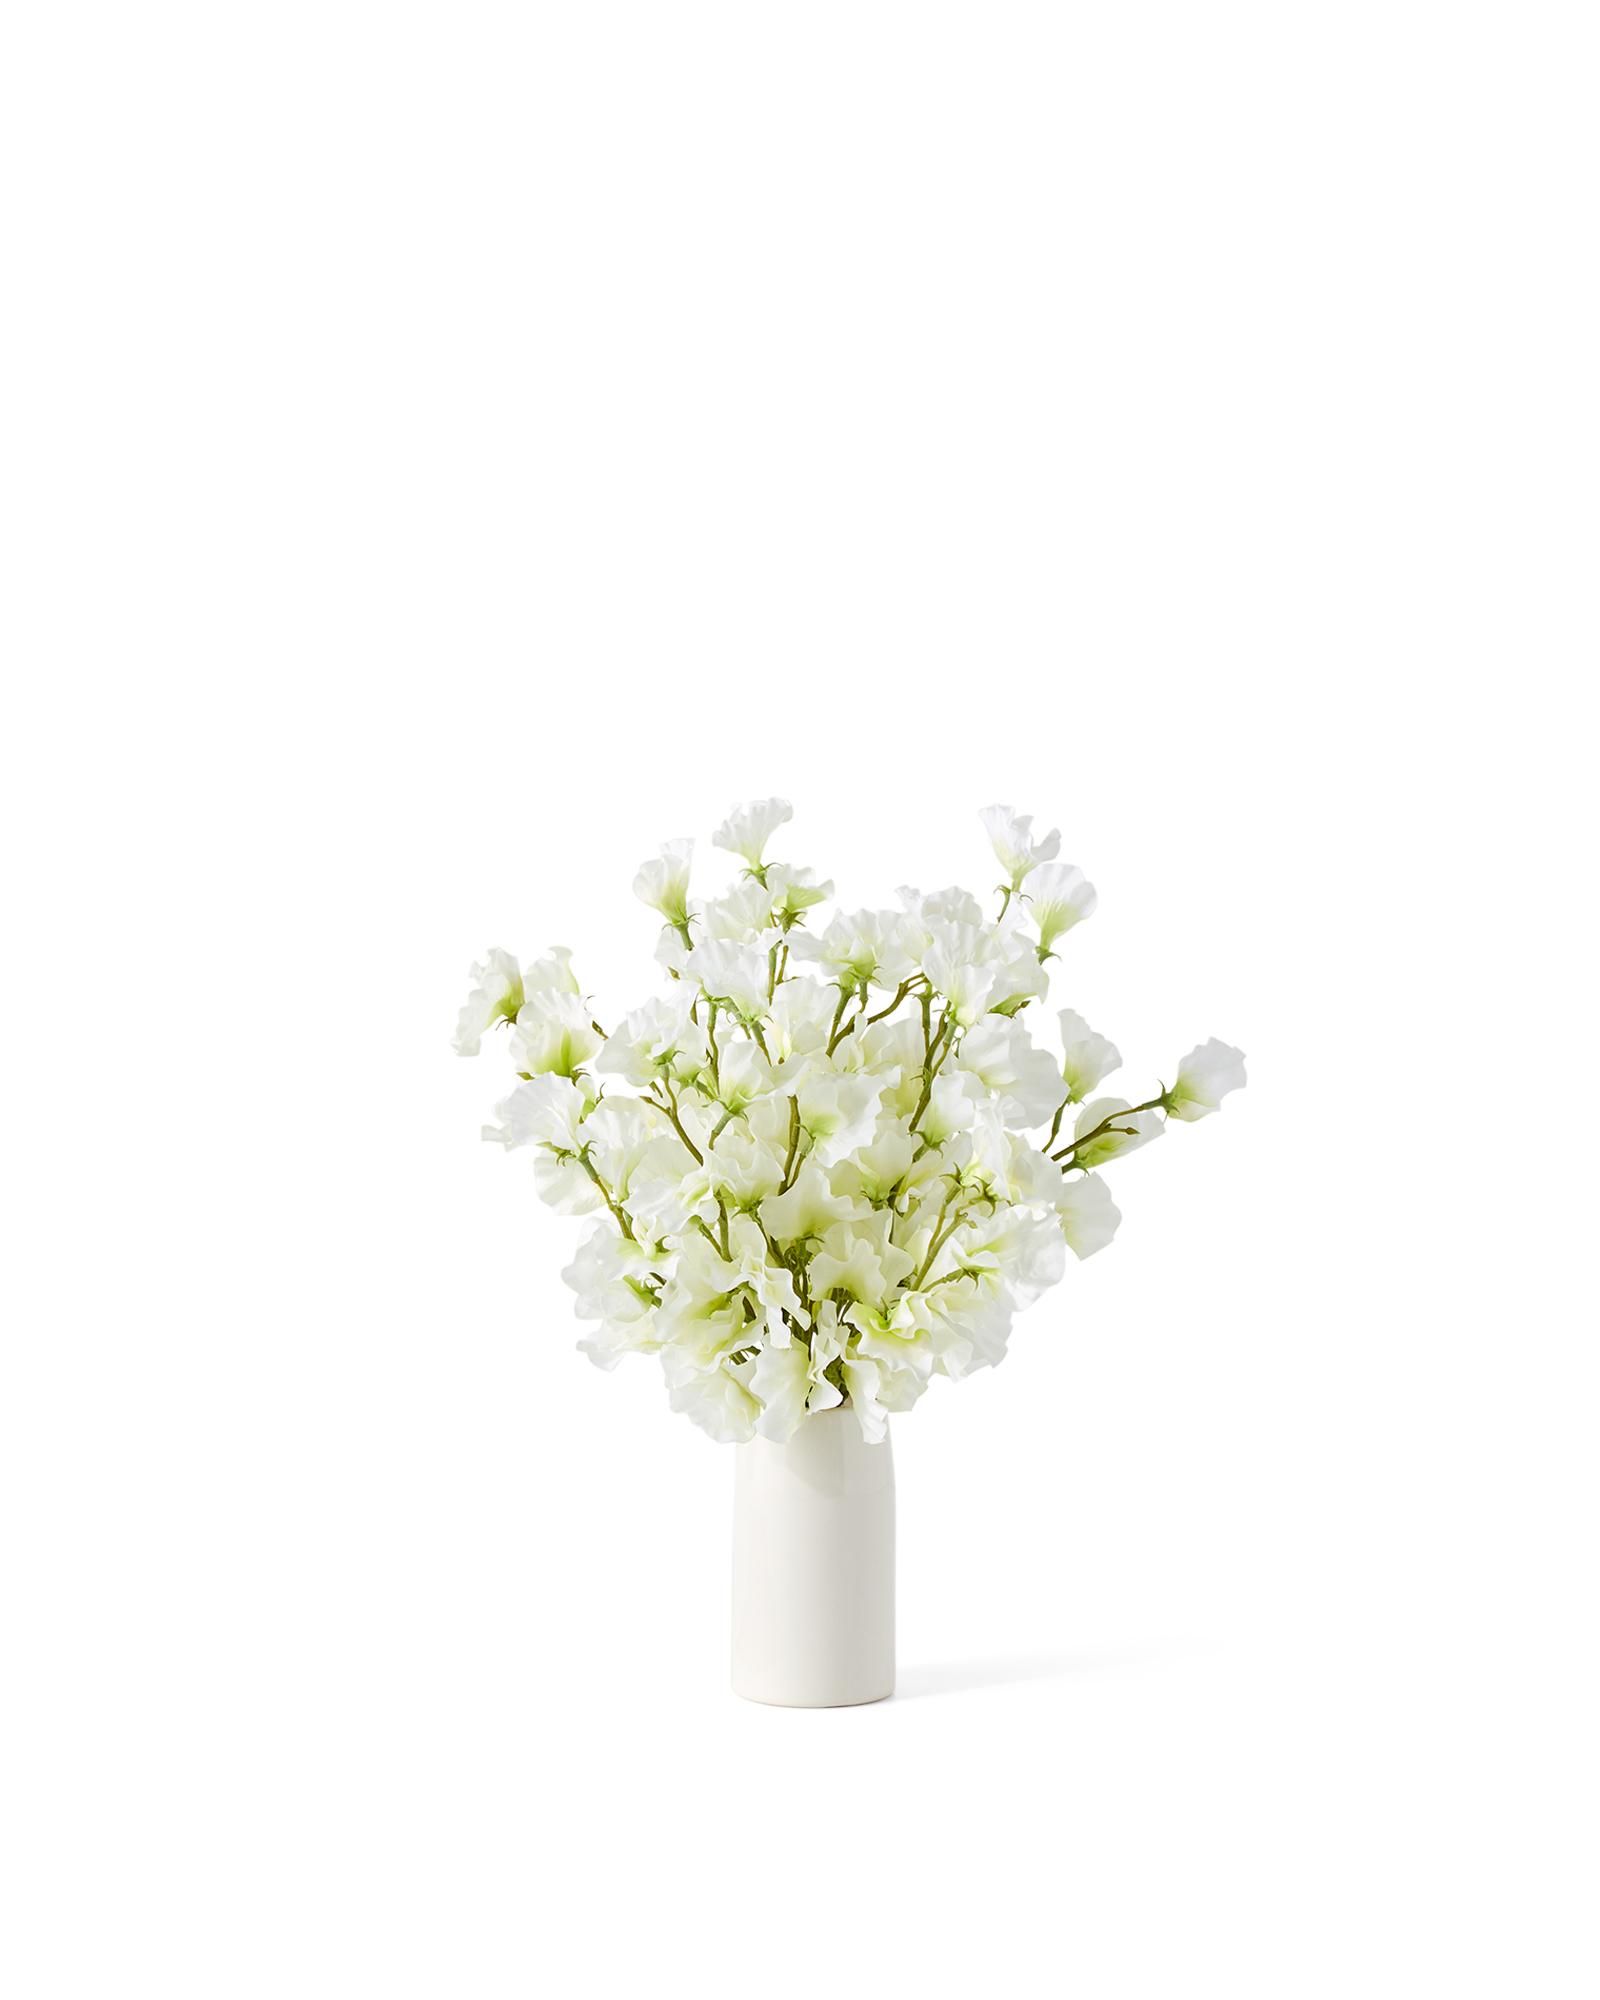 Sweet Pea Bouquet with Ceramic Vase | Serena and Lily